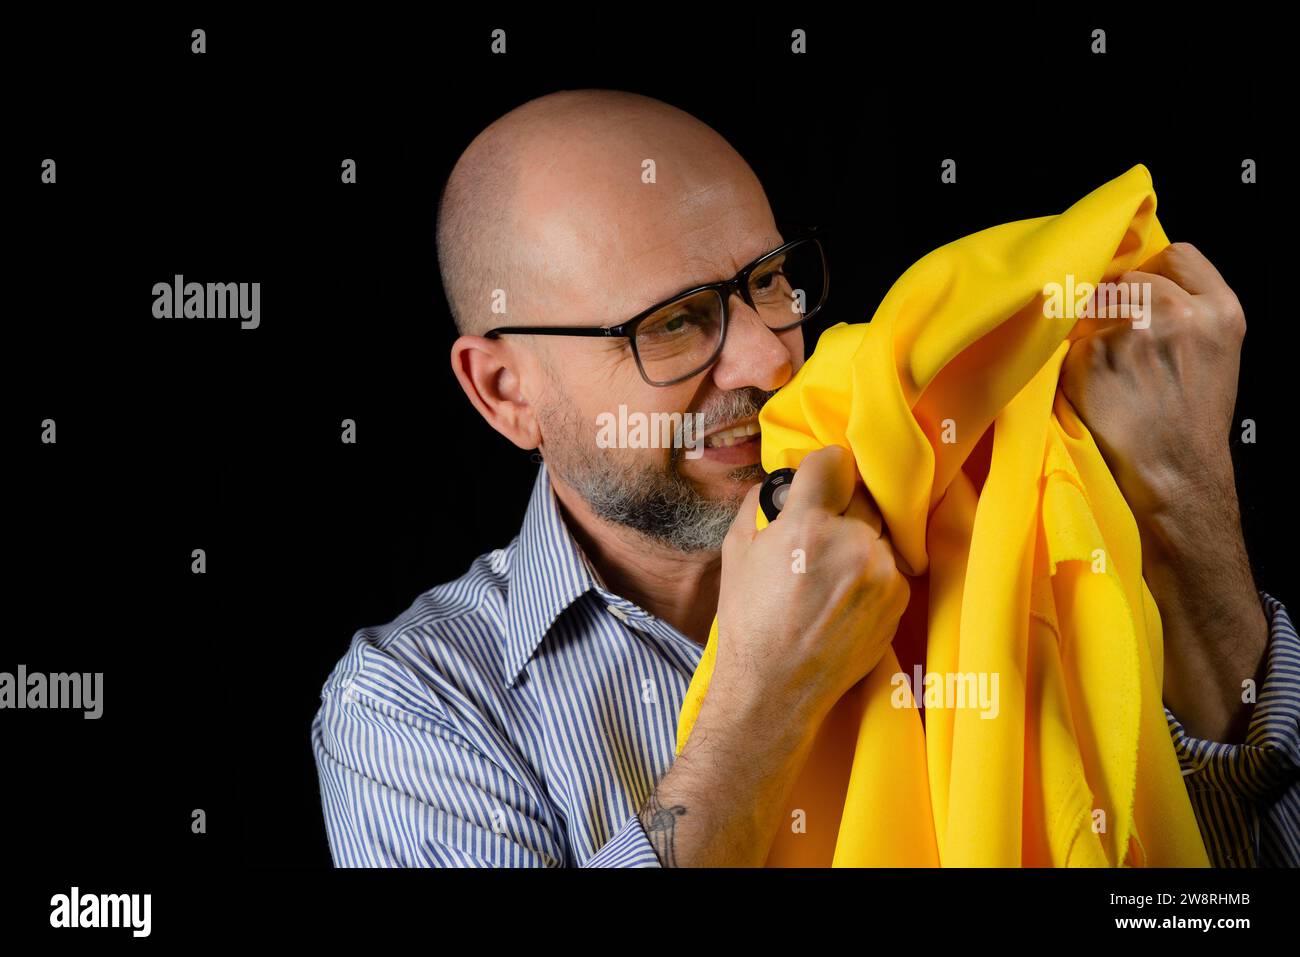 Bald, bearded man with glasses holding yellow colored cloth over his head against black background. Stock Photo